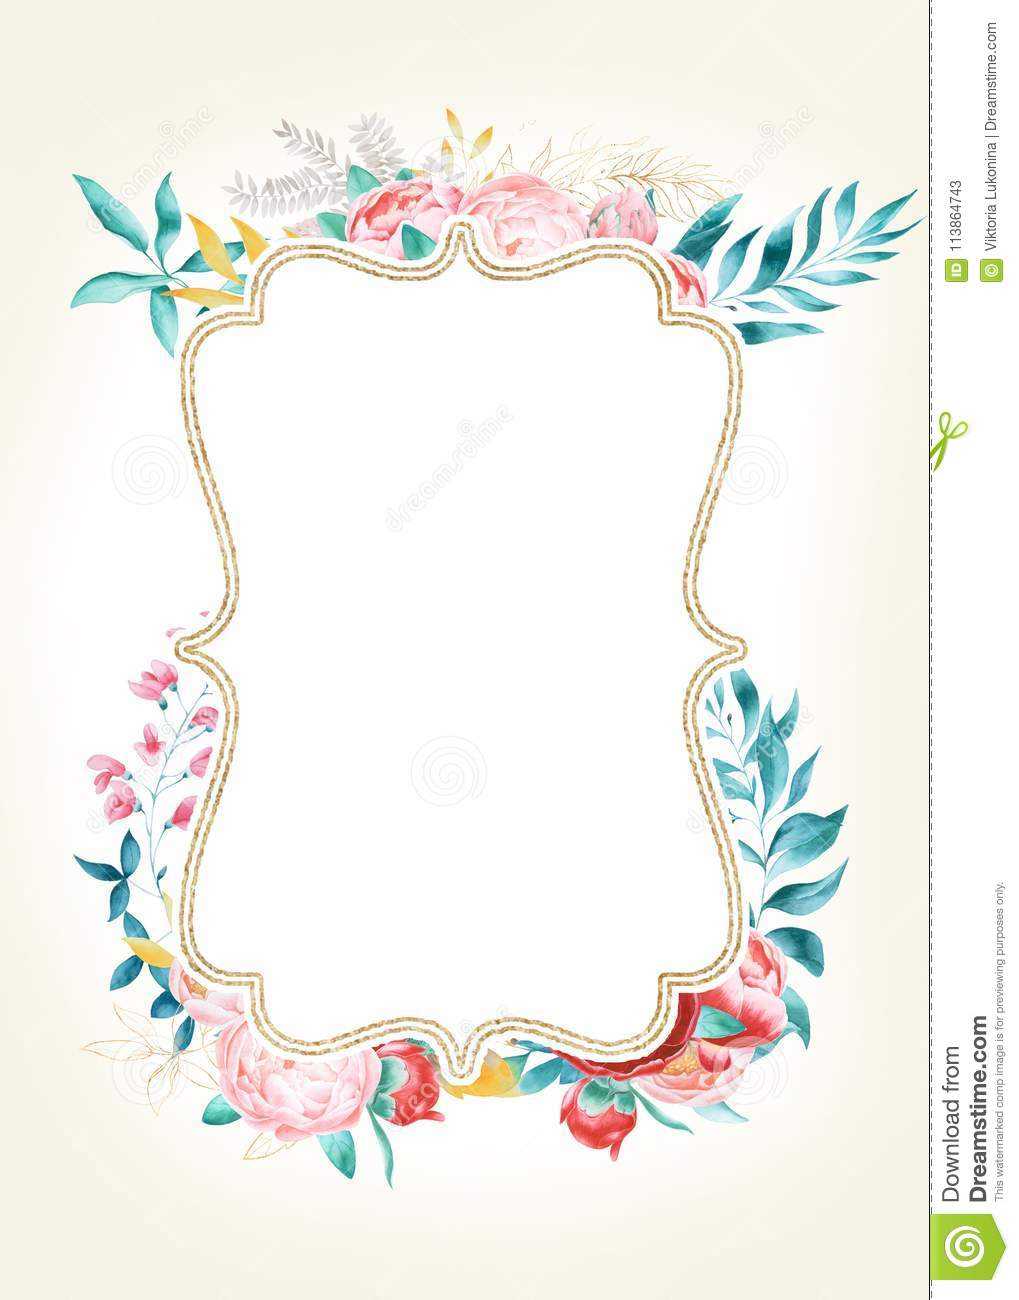 Card Template With Watercolor Peonies. Stock Illustration Within Blank Templates For Invitations